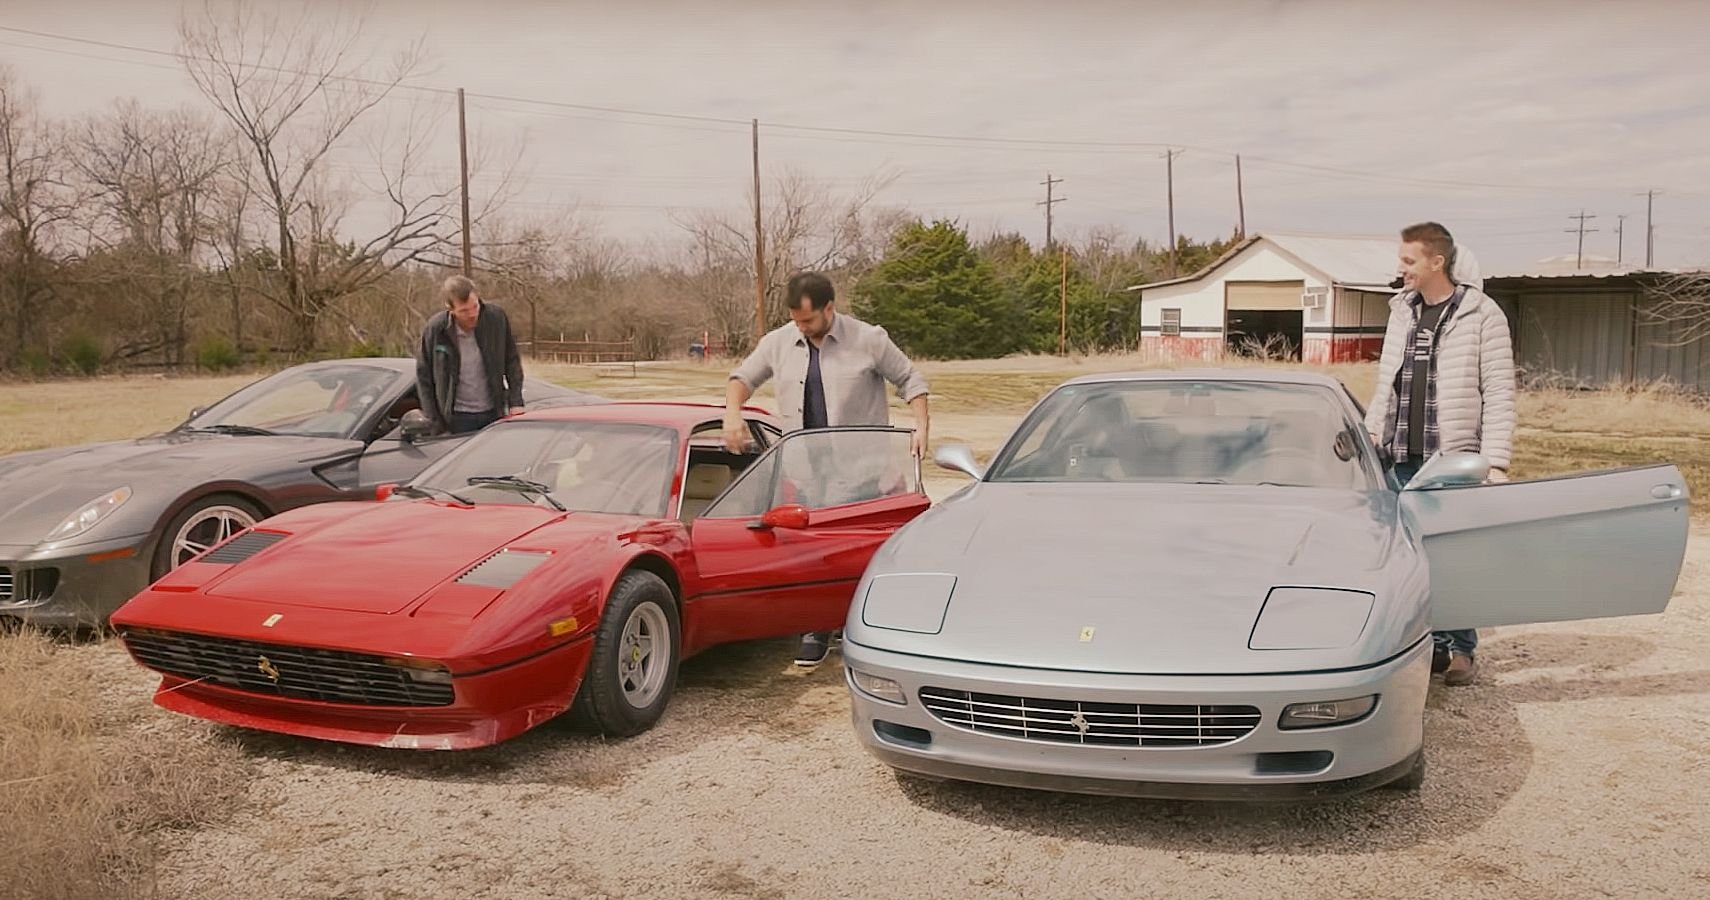 These Dirt-Cheap Ferraris Are More Trouble Than They’re Worth